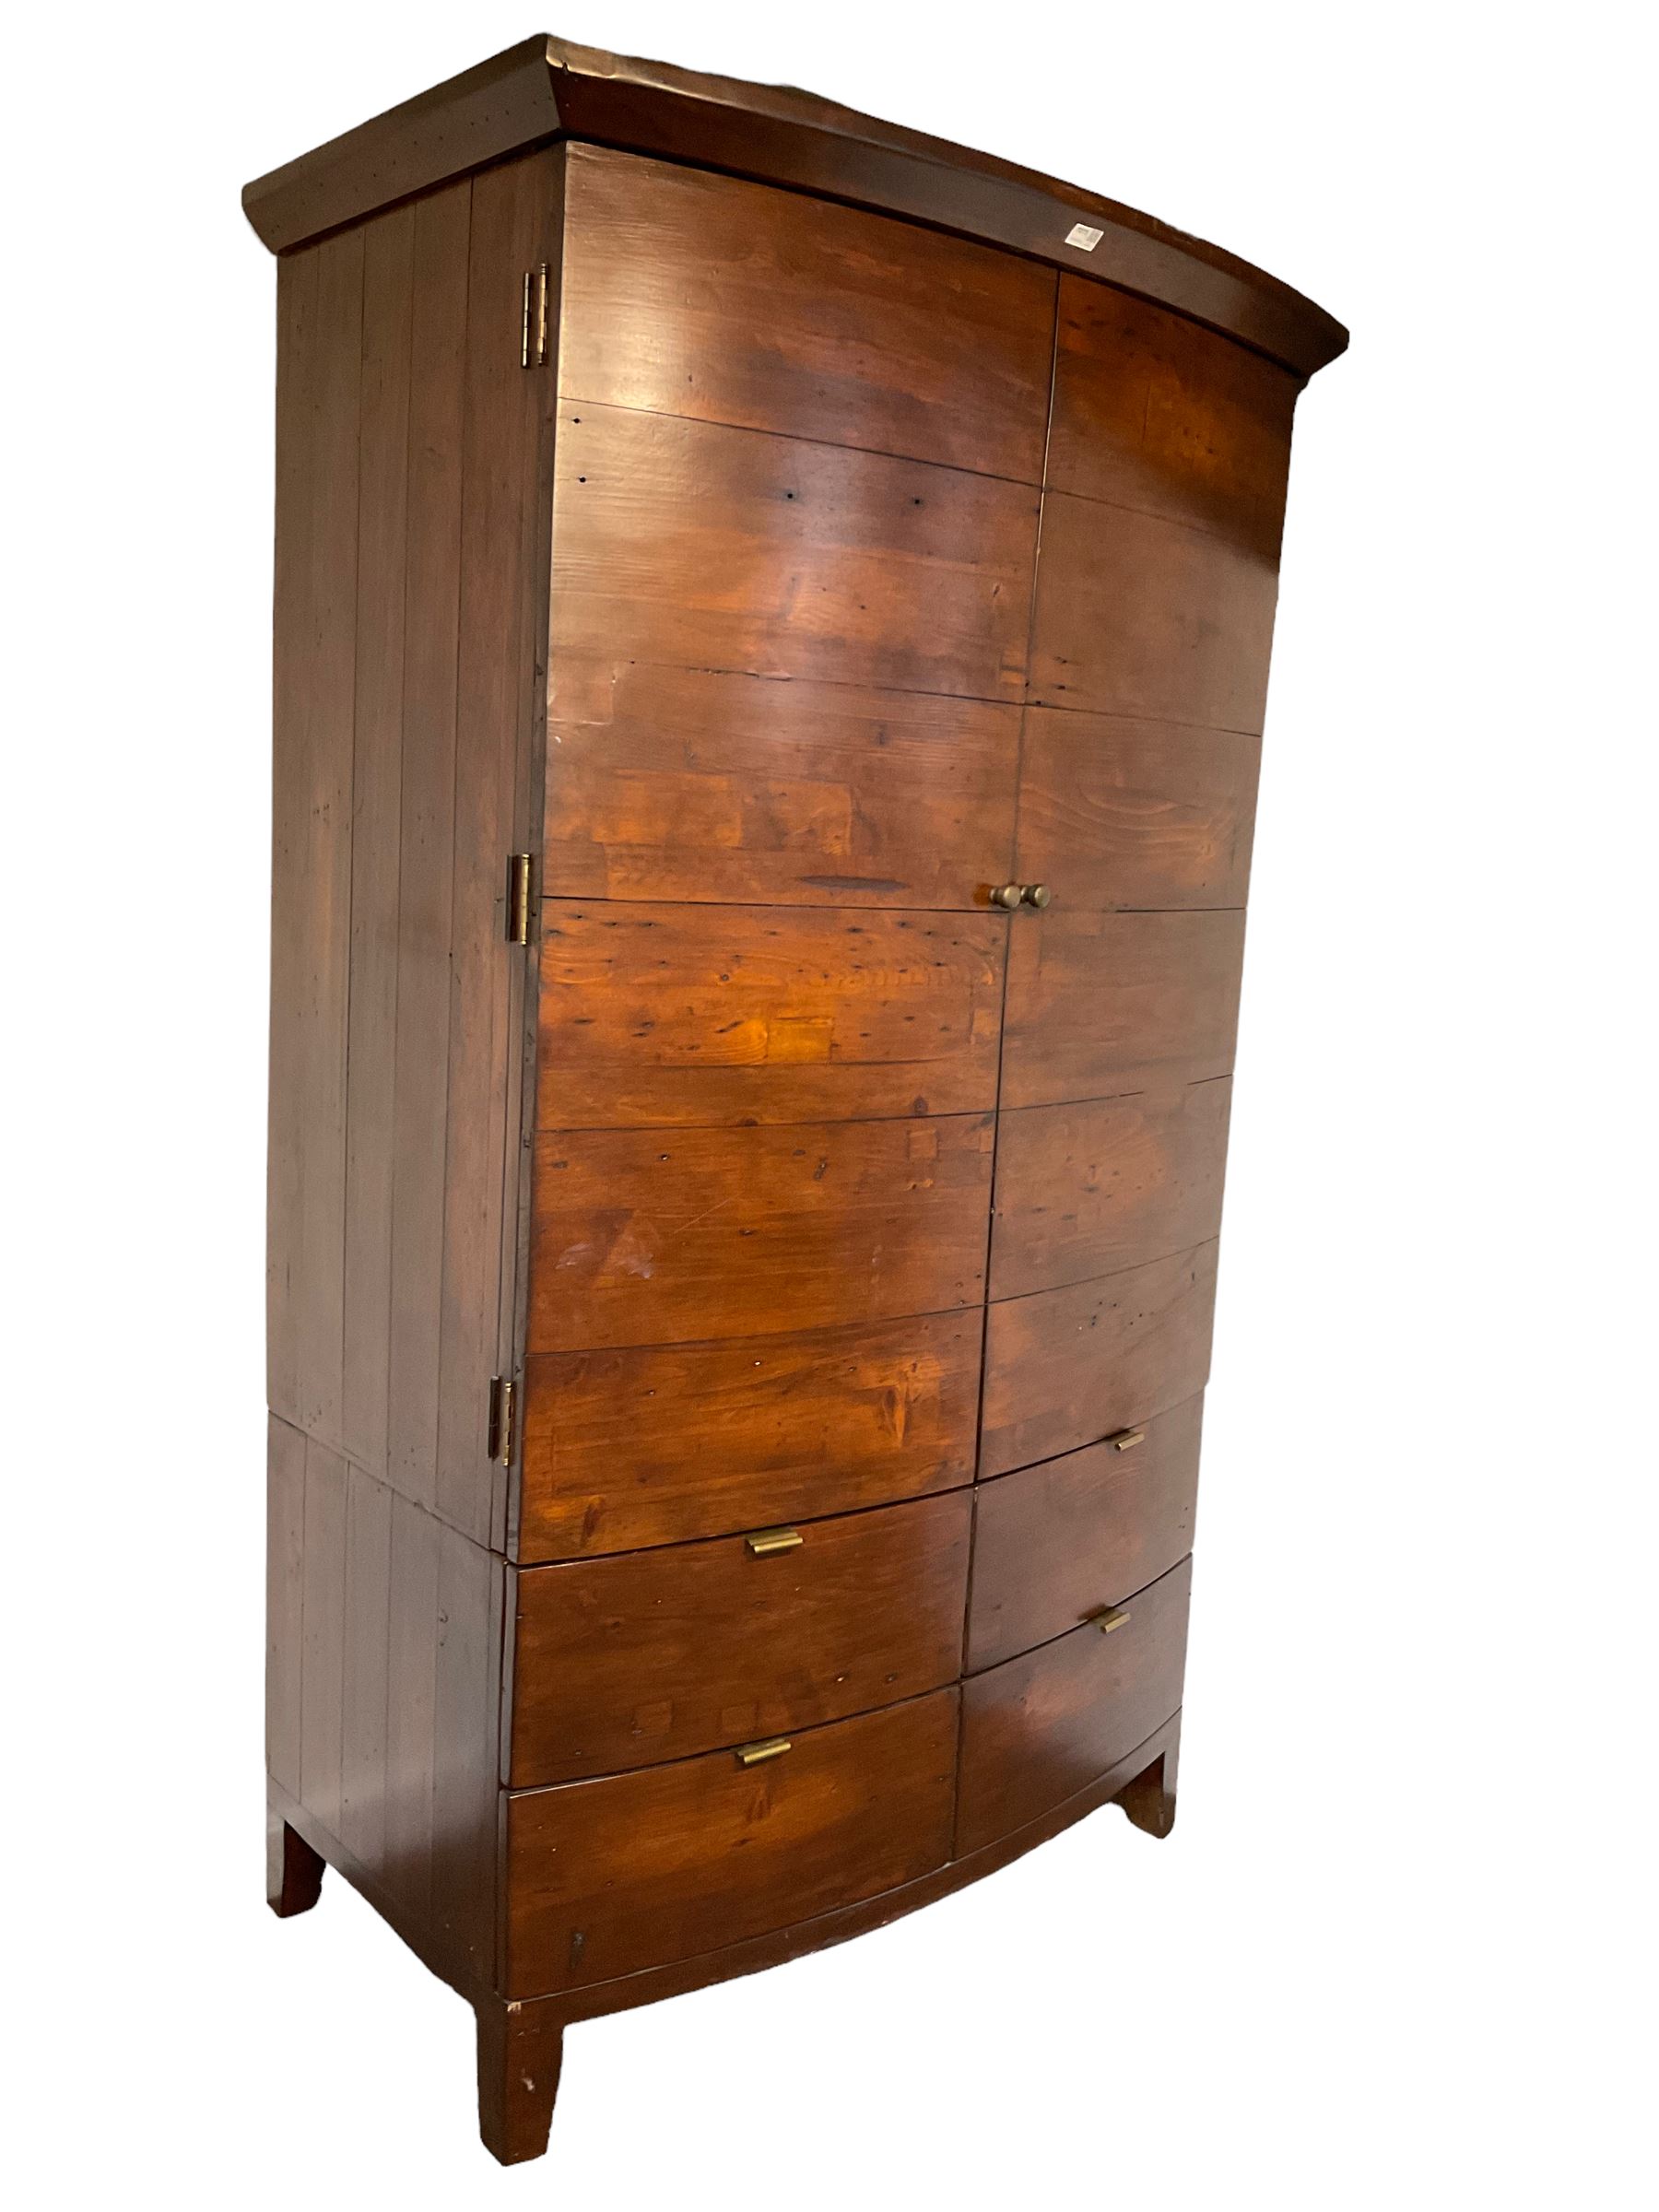 Barker & Stonehouse - Navajos reclaimed chestnut double bow front wardrobe - Image 2 of 3